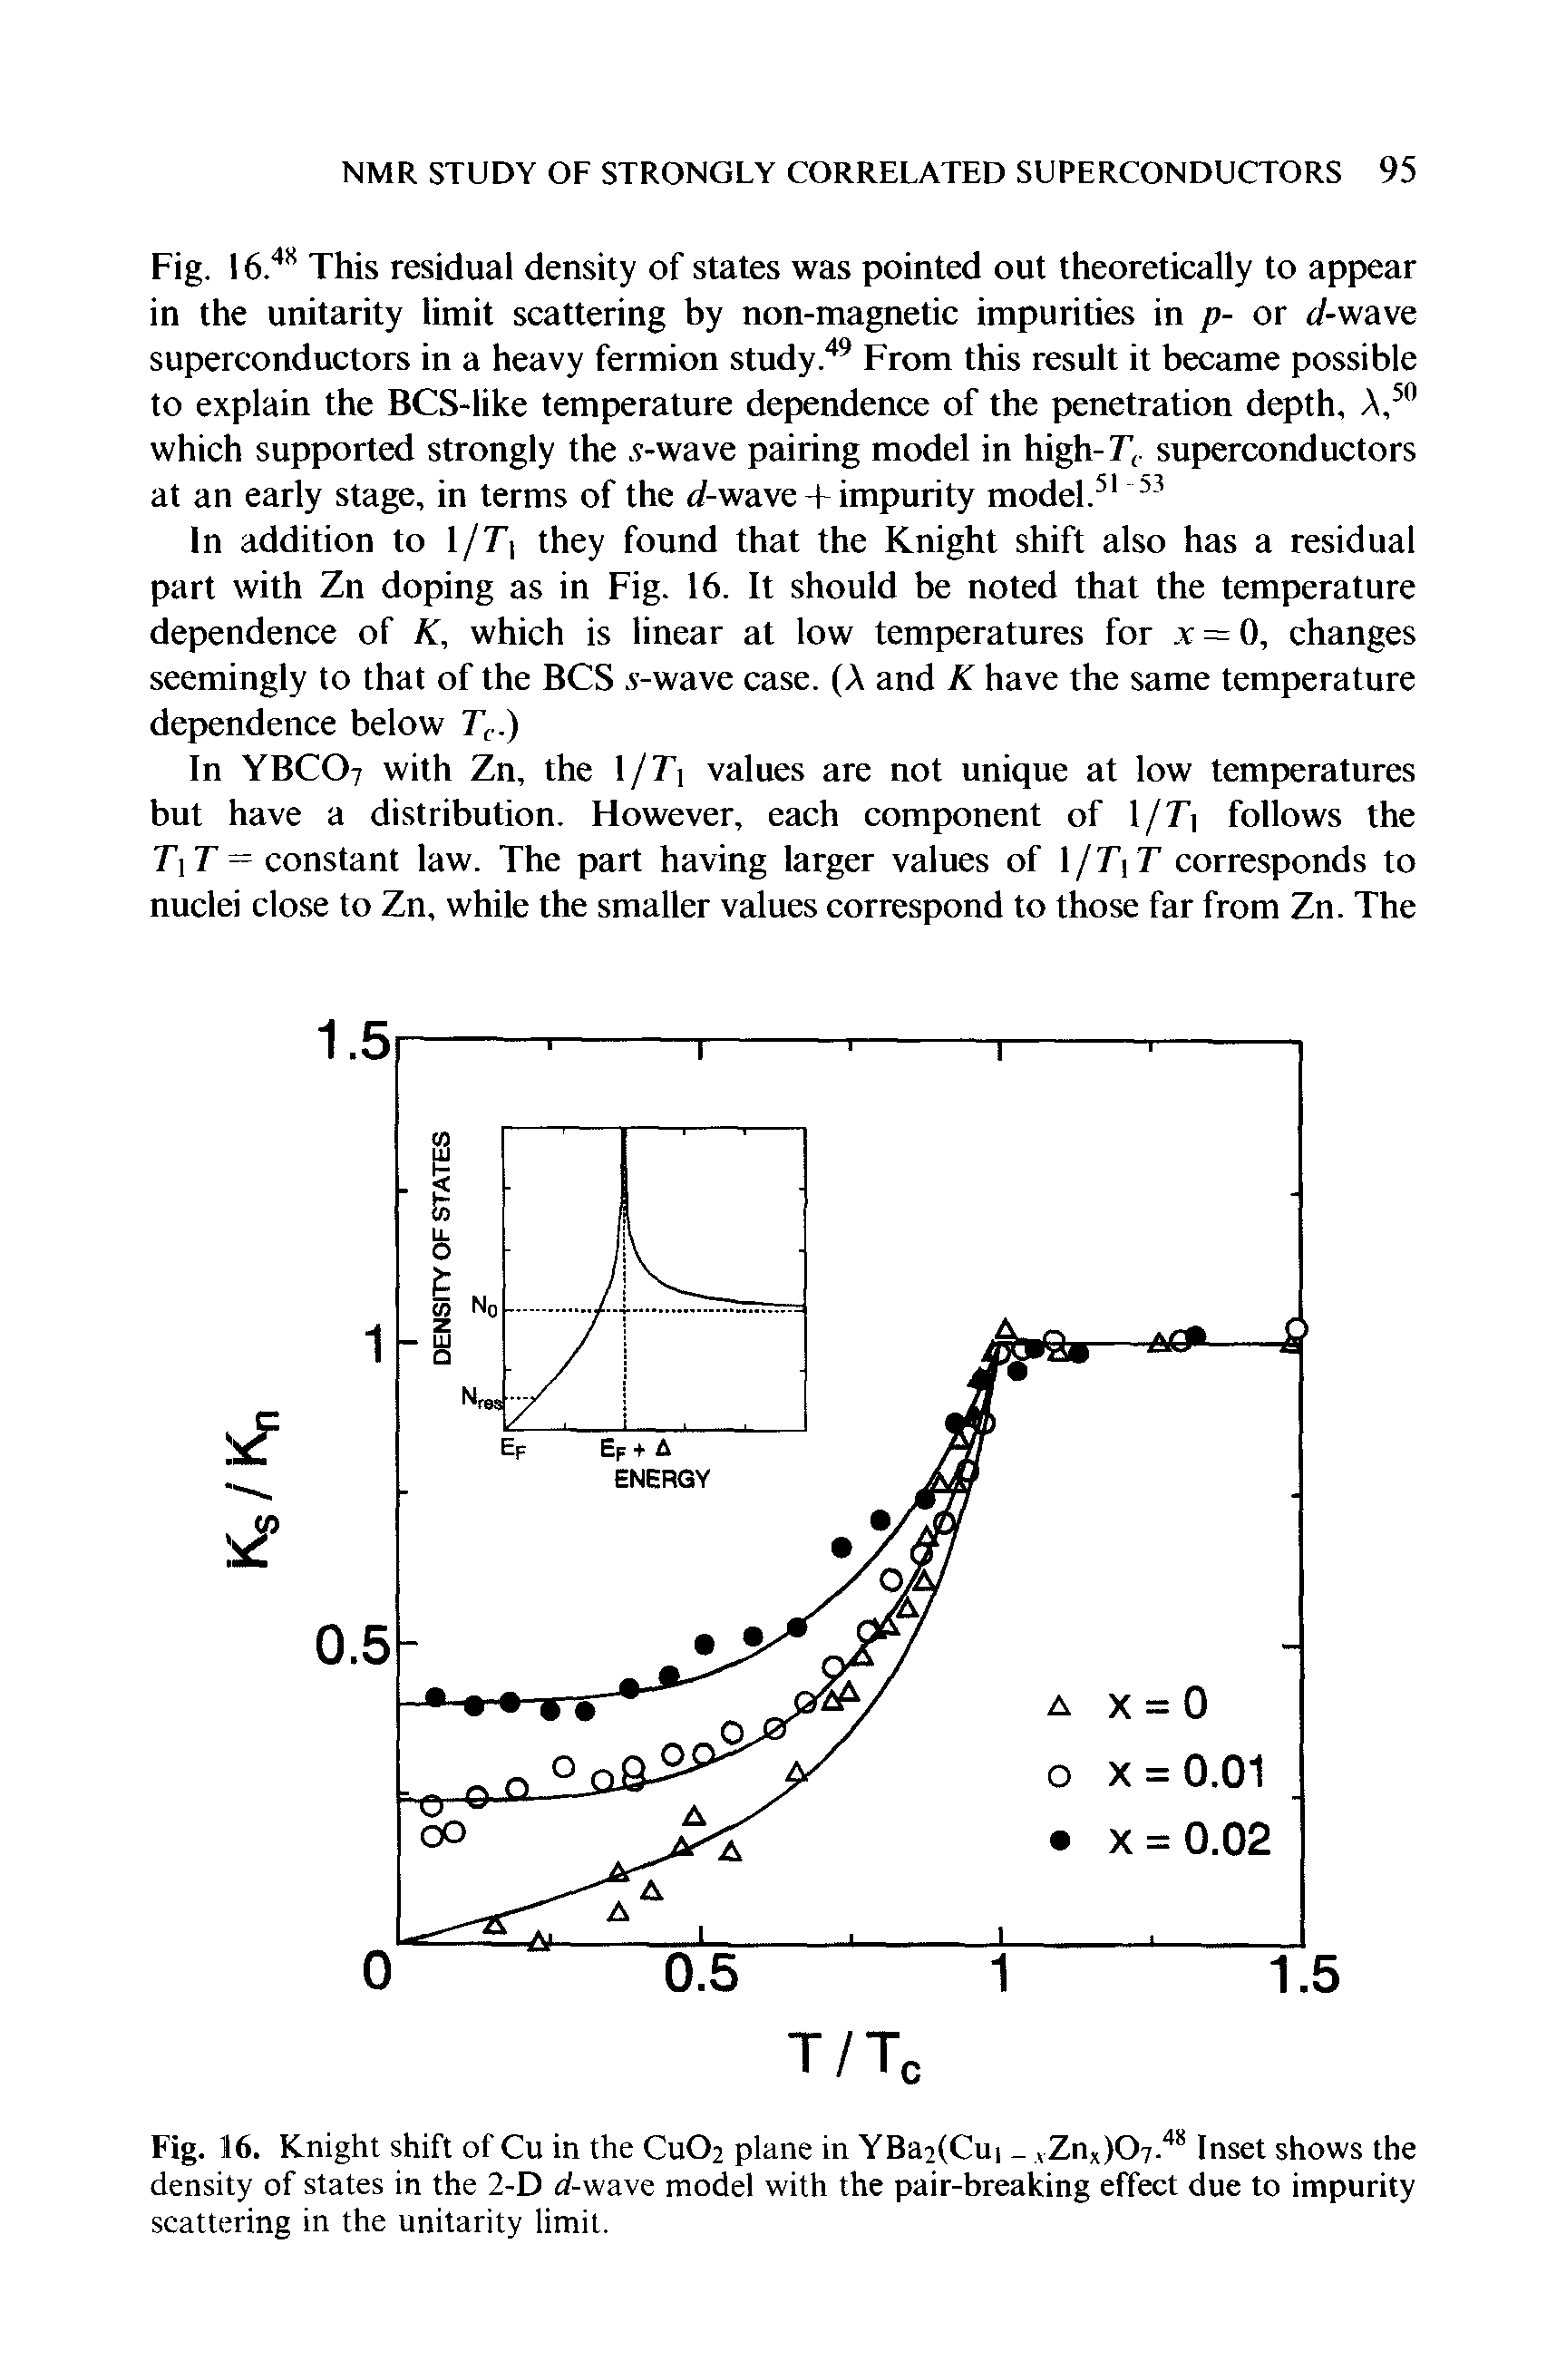 Fig. 16.48 This residual density of states was pointed out theoretically to appear in the unitarity limit scattering by non-magnetic impurities in p- or d-wave superconductors in a heavy fermion study.49 From this result it became possible to explain the BCS-like temperature dependence of the penetration depth, A,50 which supported strongly the. 9-wave pairing model in high-7 , superconductors at an early stage, in terms of the d-wave + impurity model.51 53...